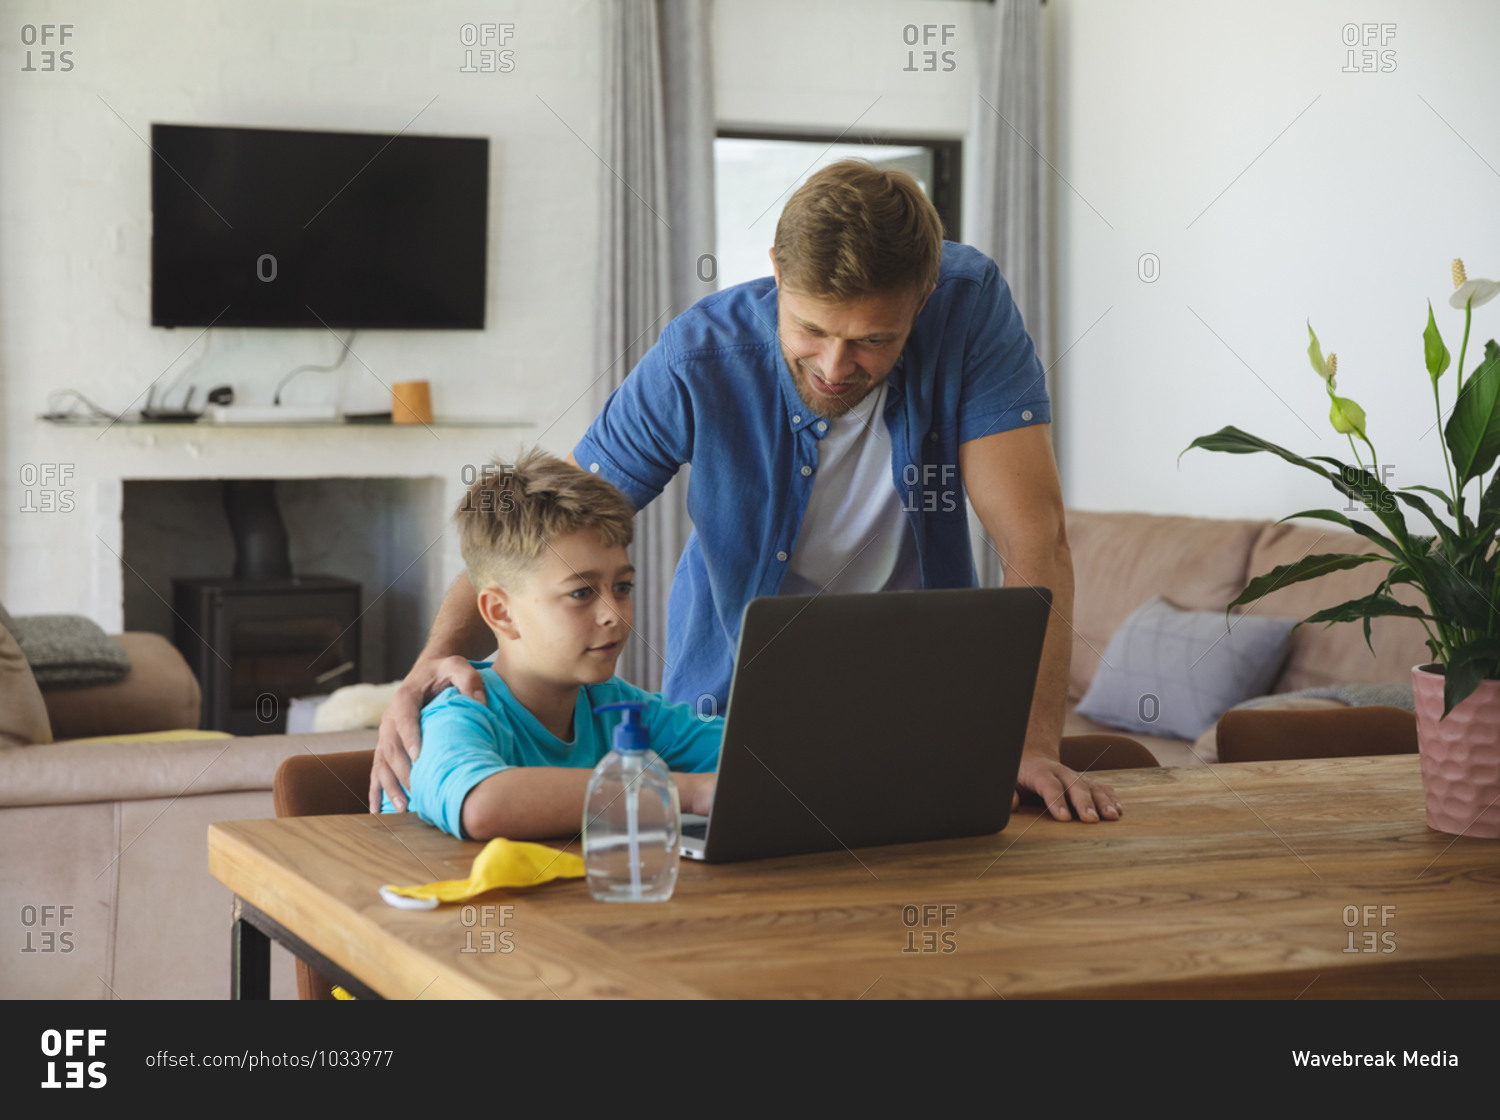 Caucasian man at home with his son together, boy sitting at table, using laptop computer, father standing next to him. Social distancing during Covid 19 Coronavirus quarantine lockdown.